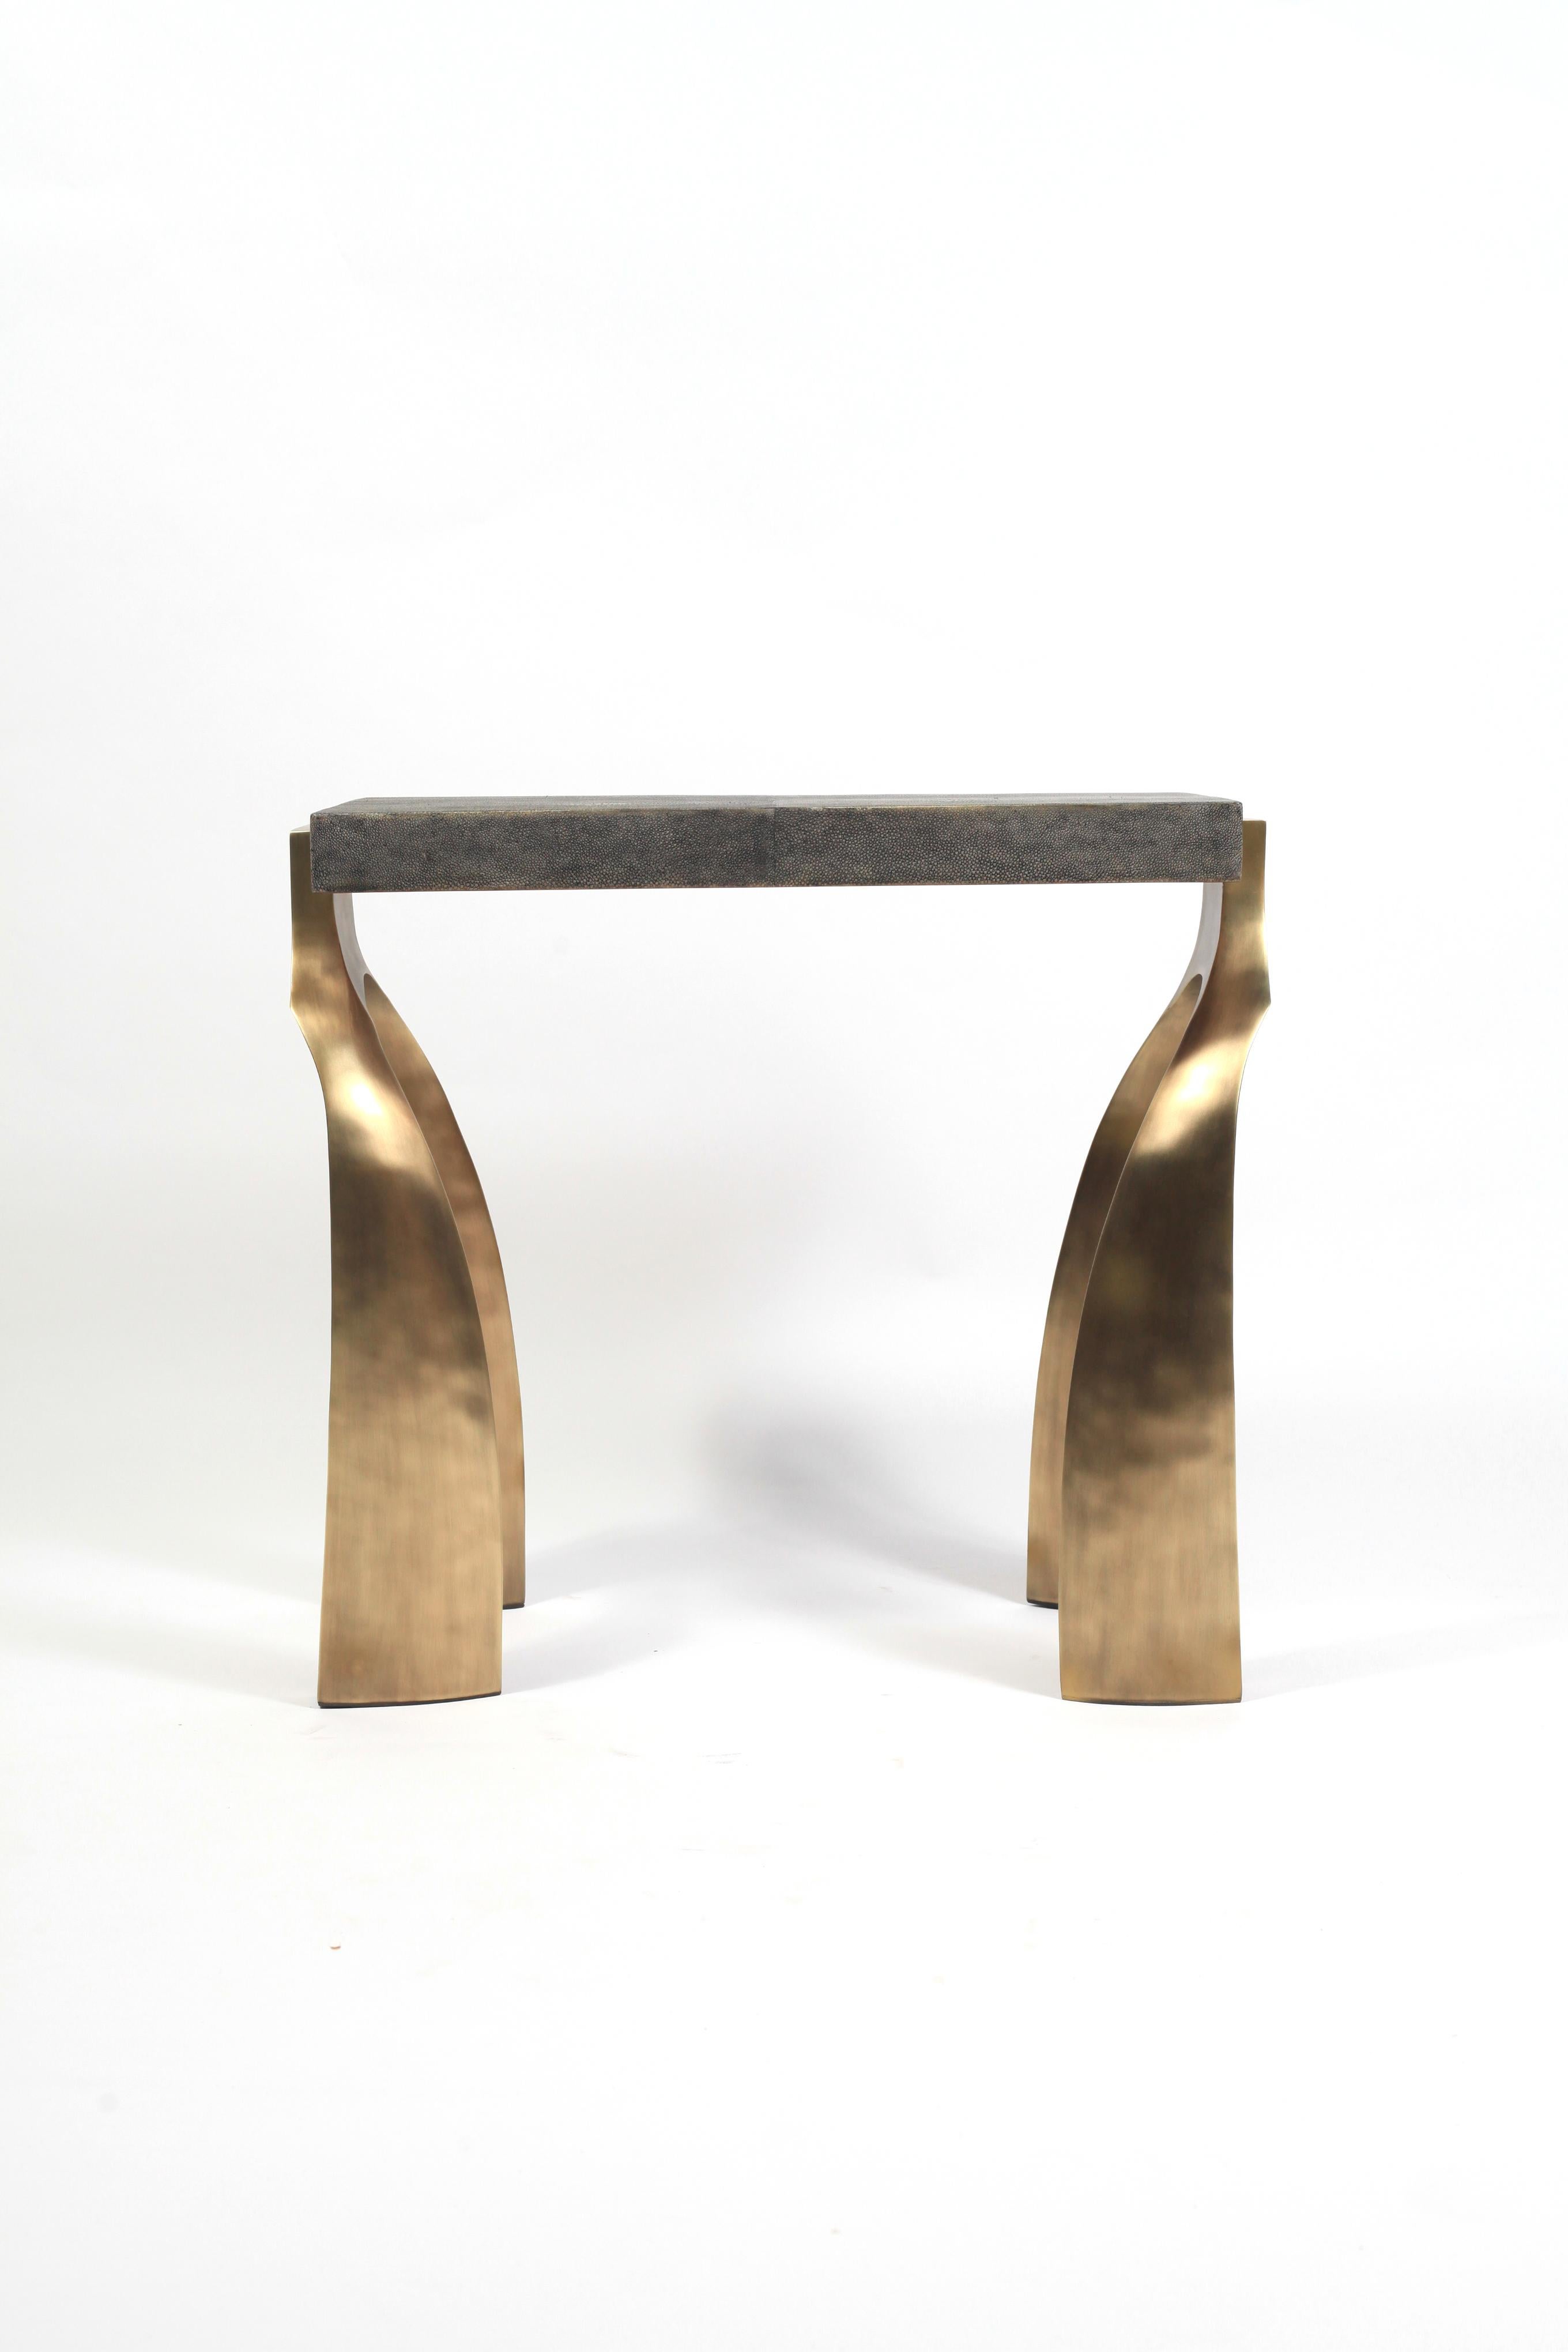 Contemporary Rectangle Galaxy Side Table in Onyx and Bronze-Patina Brass by Kifu Paris For Sale